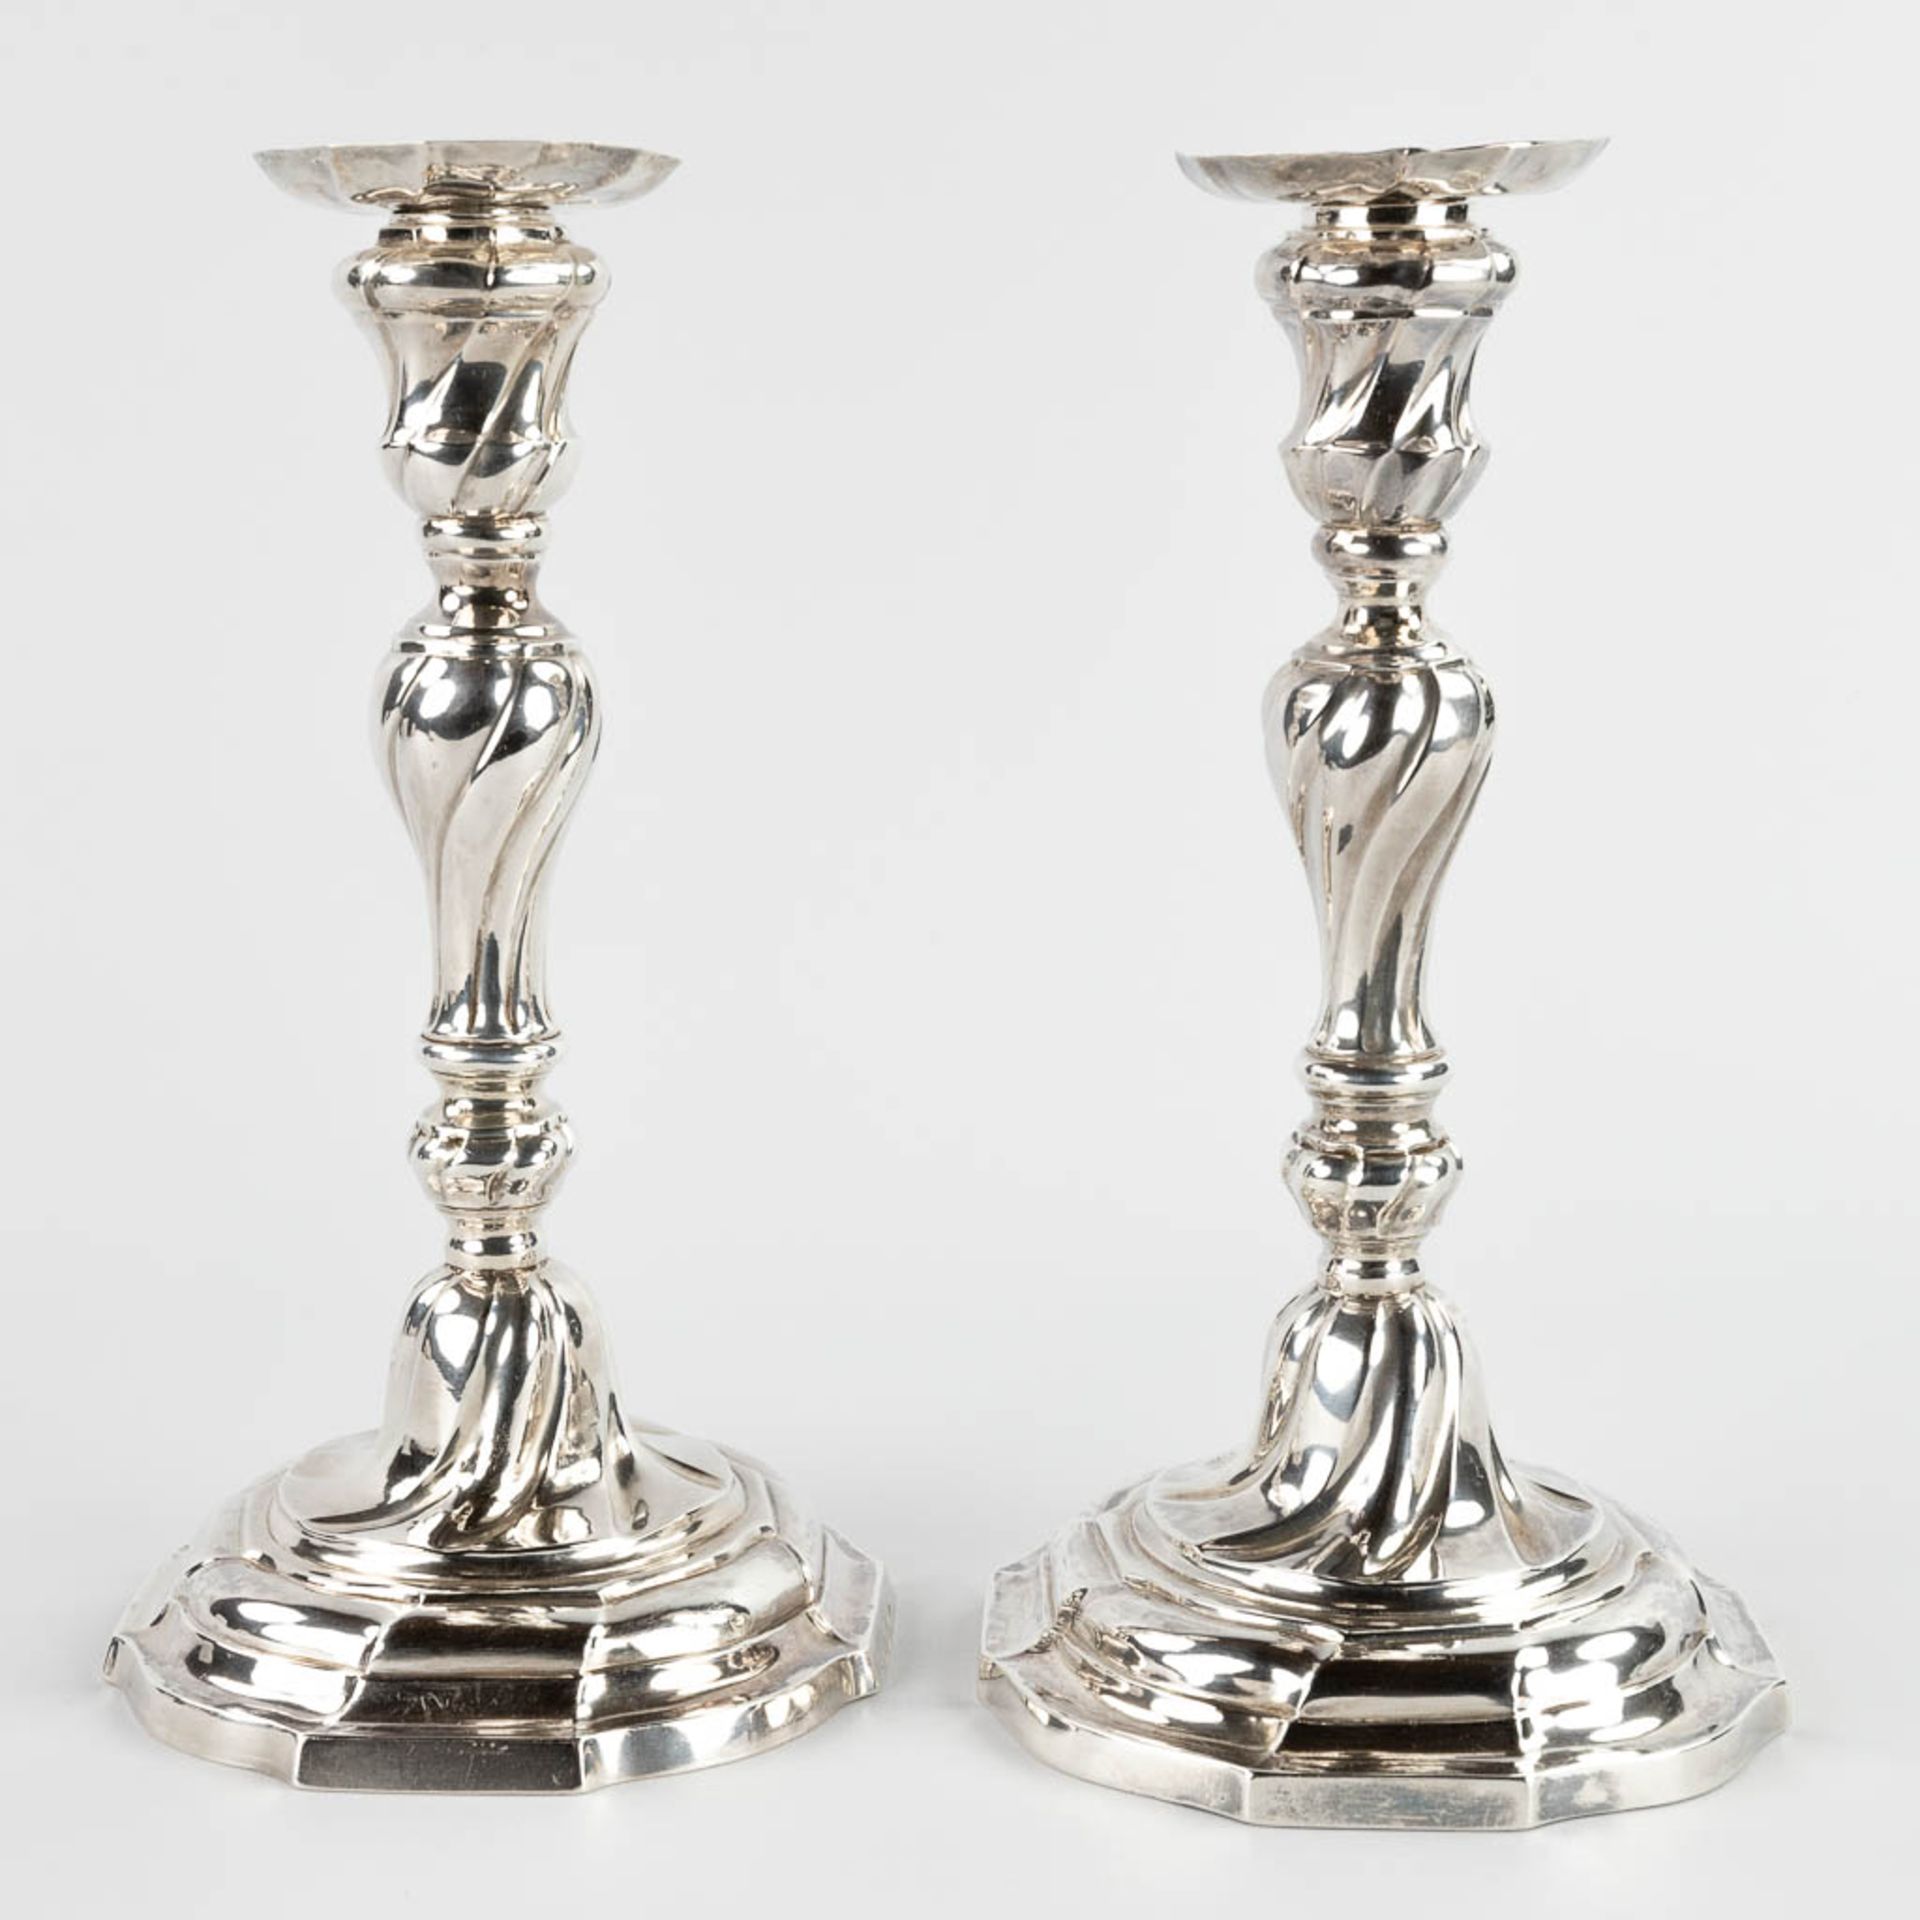 A pair of antique silver candlesticks, Ghent, 1777. Marked N.J. Viene (Viette?). Belgium, 18th C. 61 - Image 3 of 10